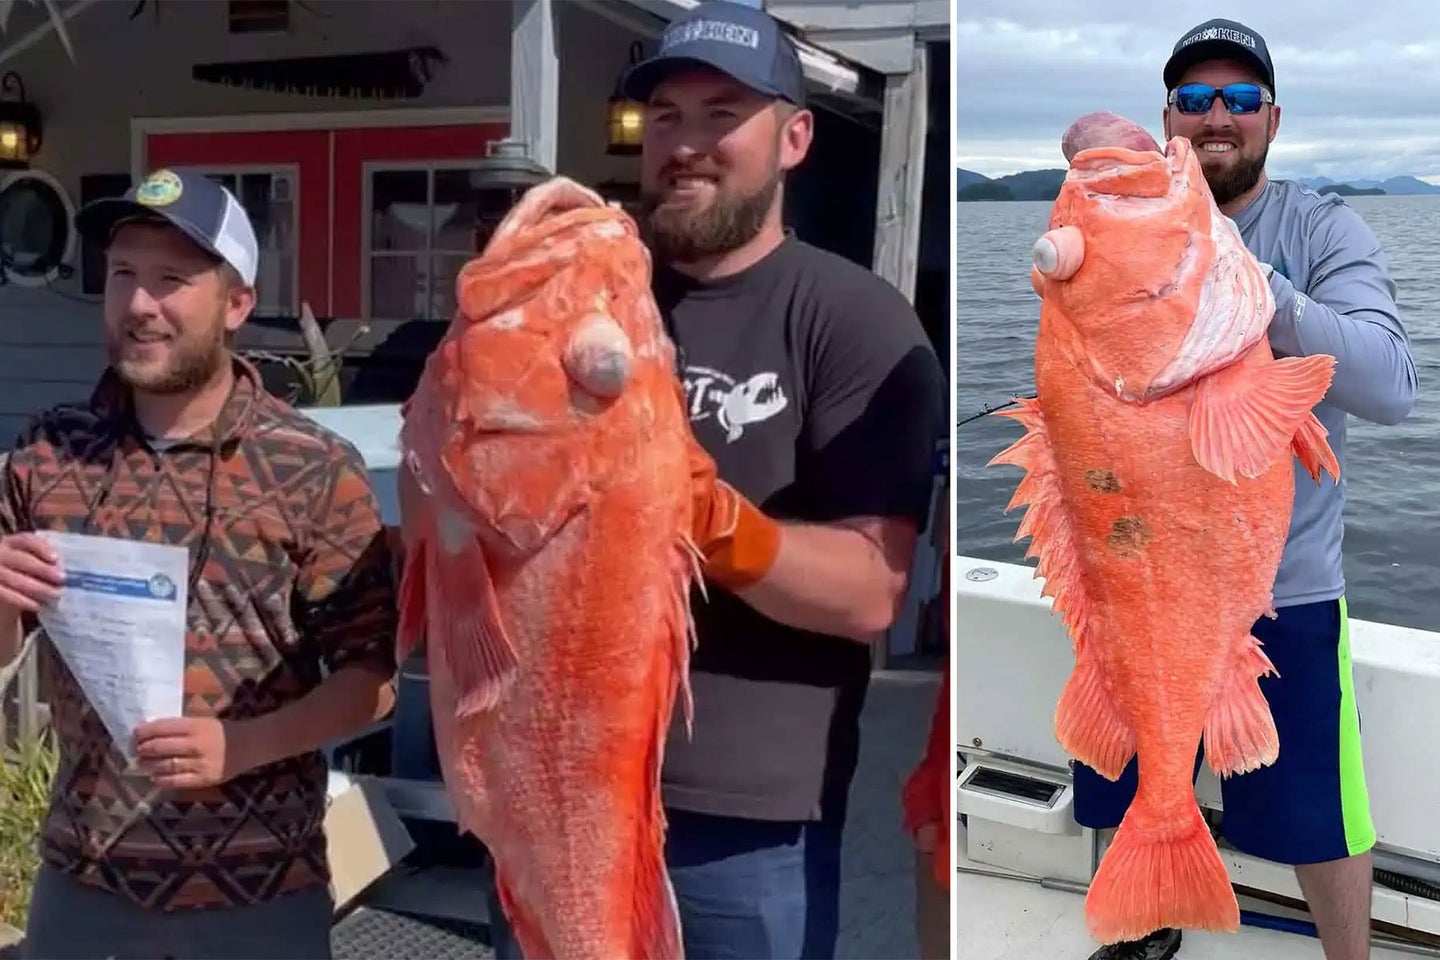 Shortraker rockfish range from southeastern Kamchatka, north into the Bering Sea, through the Aleutian Islands and Gulf of Alaska, and south to southern California.